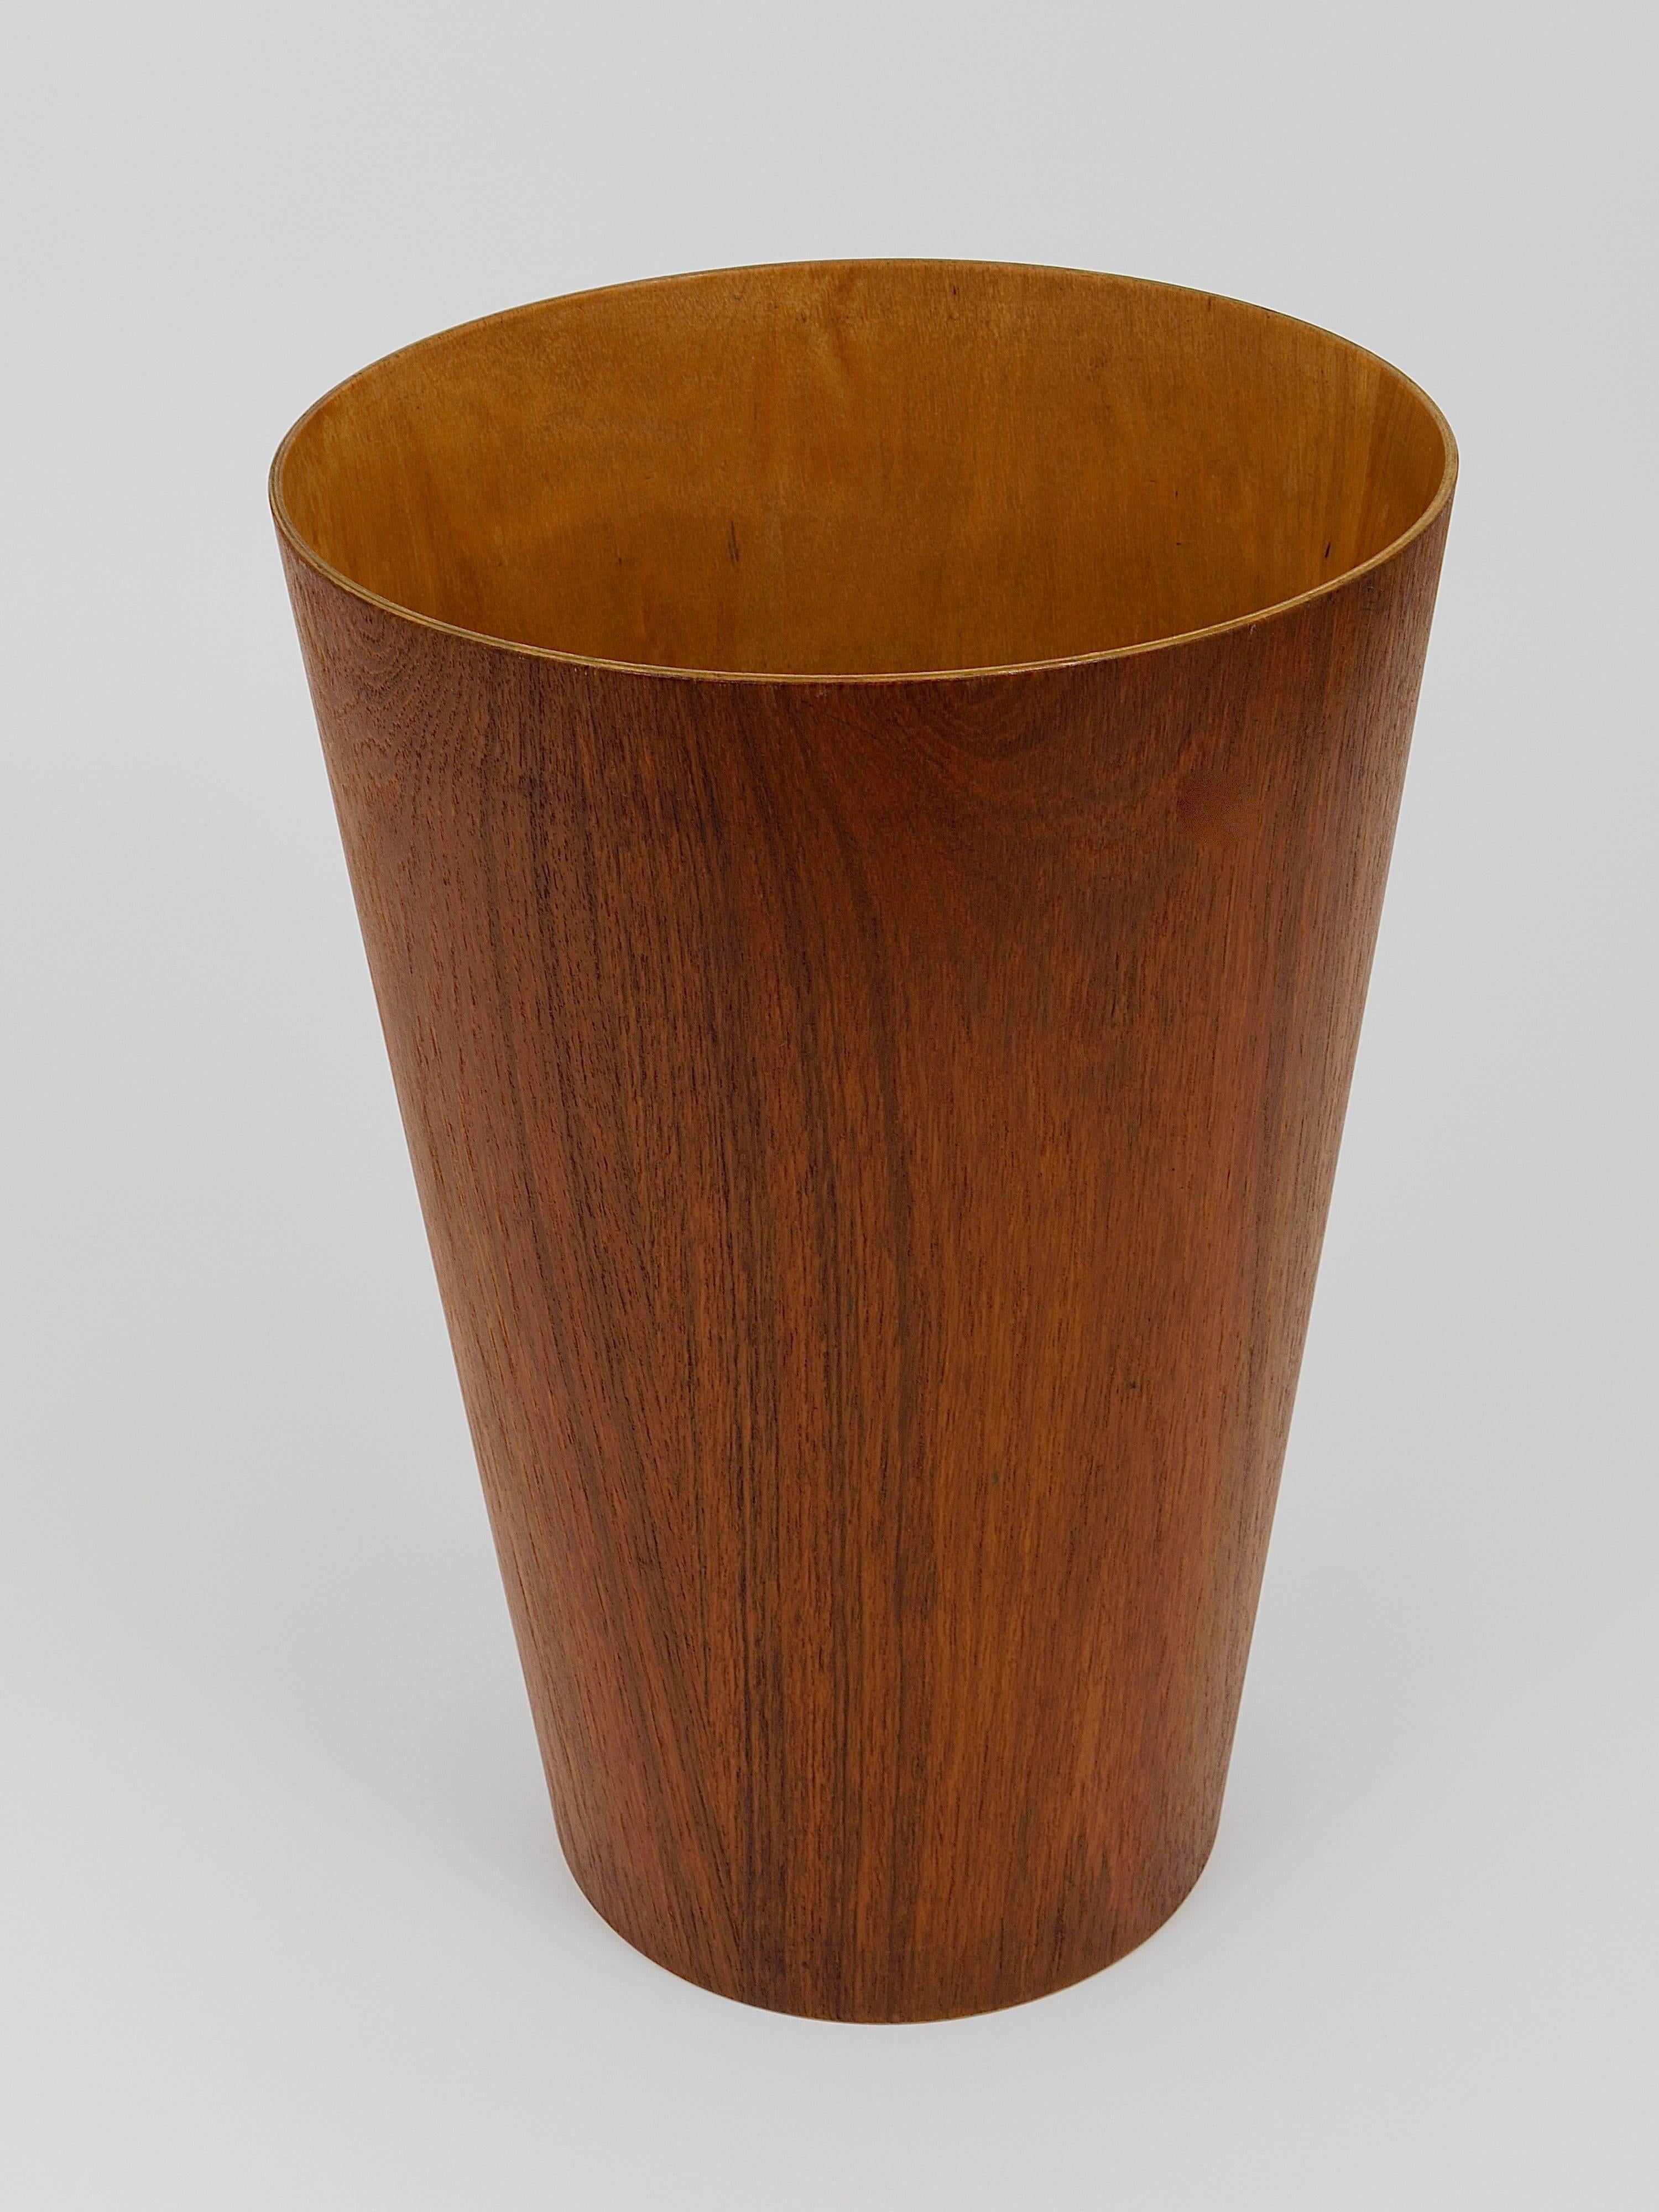 A beautiful Mid-Century Modern Scandinavian waste paper basket, paper bin from the 1960s. Designed by Martin Aberg, executed by Servex/House of Rainbow Wood Products, made in Sweden. In excellent condition. Marked on its underneath: “Servex/Rainbow